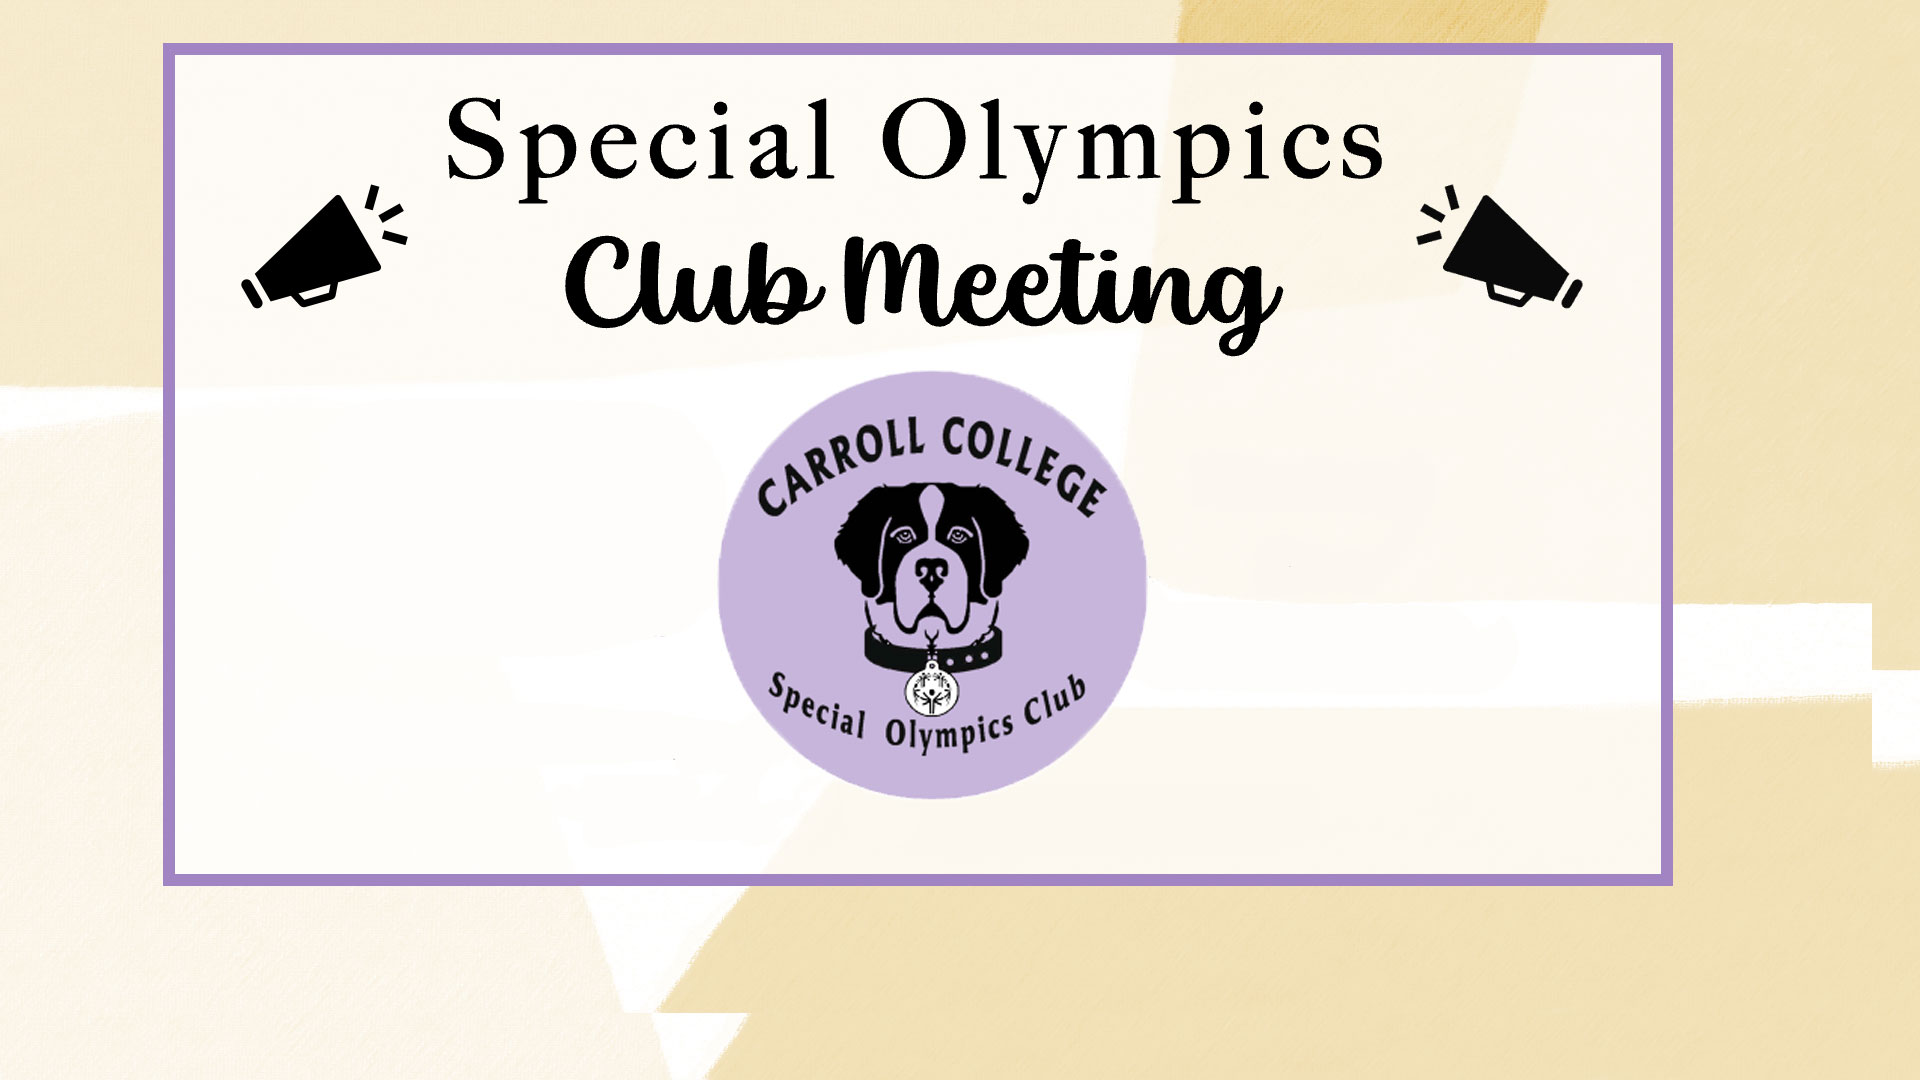 Special Olympics Club Meeting